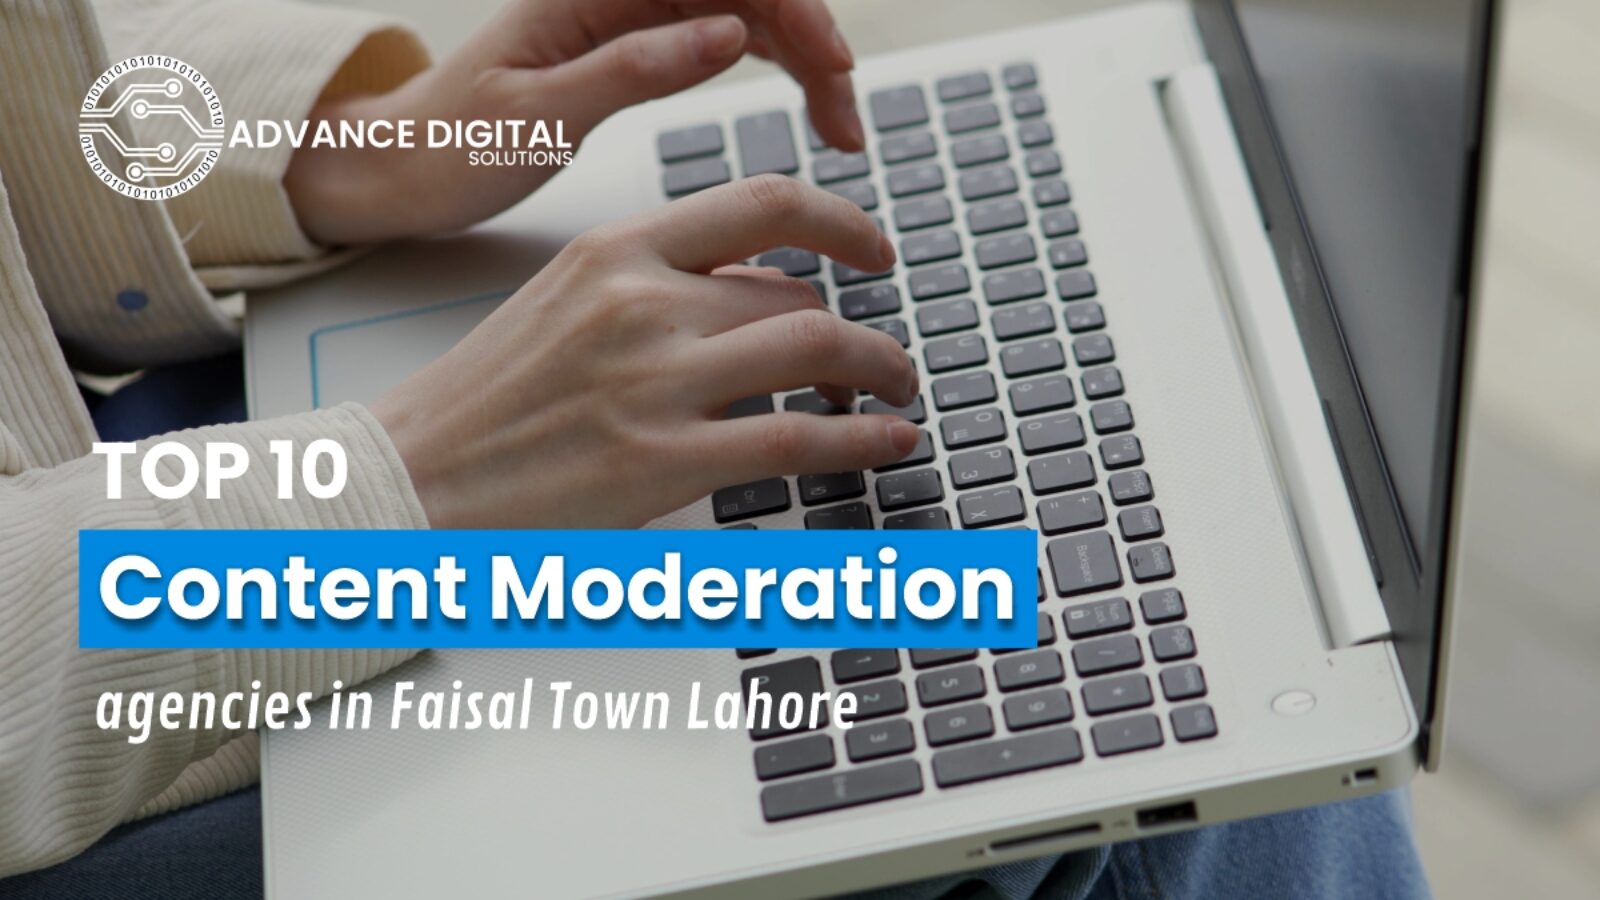 Top 10 content moderation agencies in Faisal Town Lahore